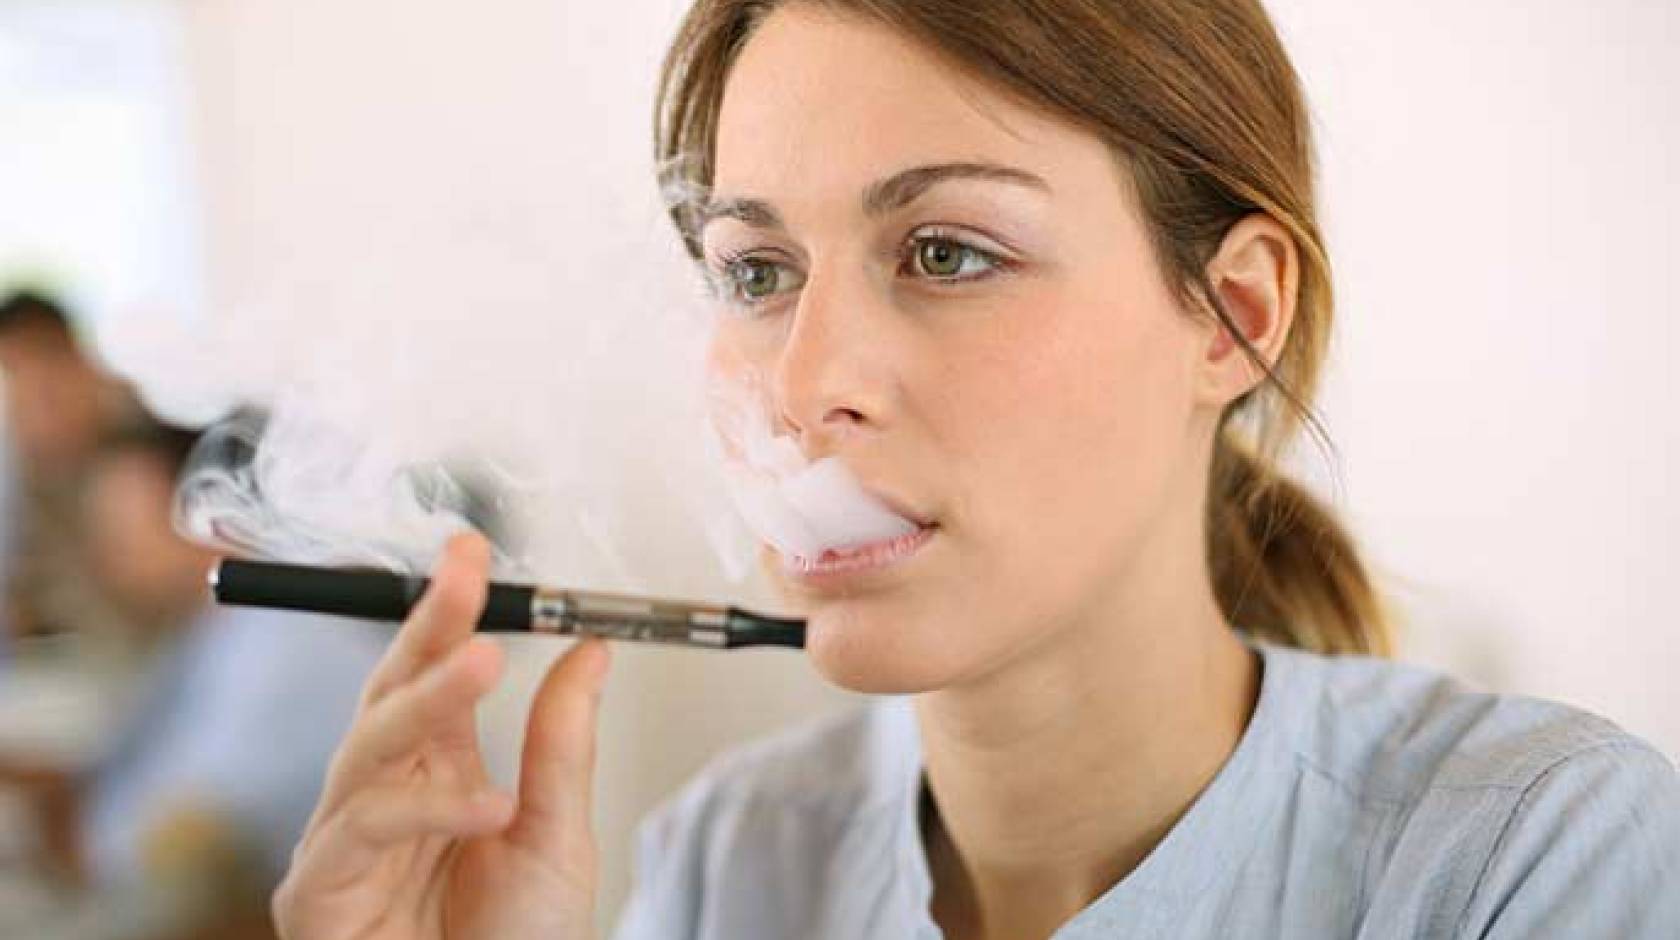 Dual use of e-cigarettes with conventional tobacco is associated